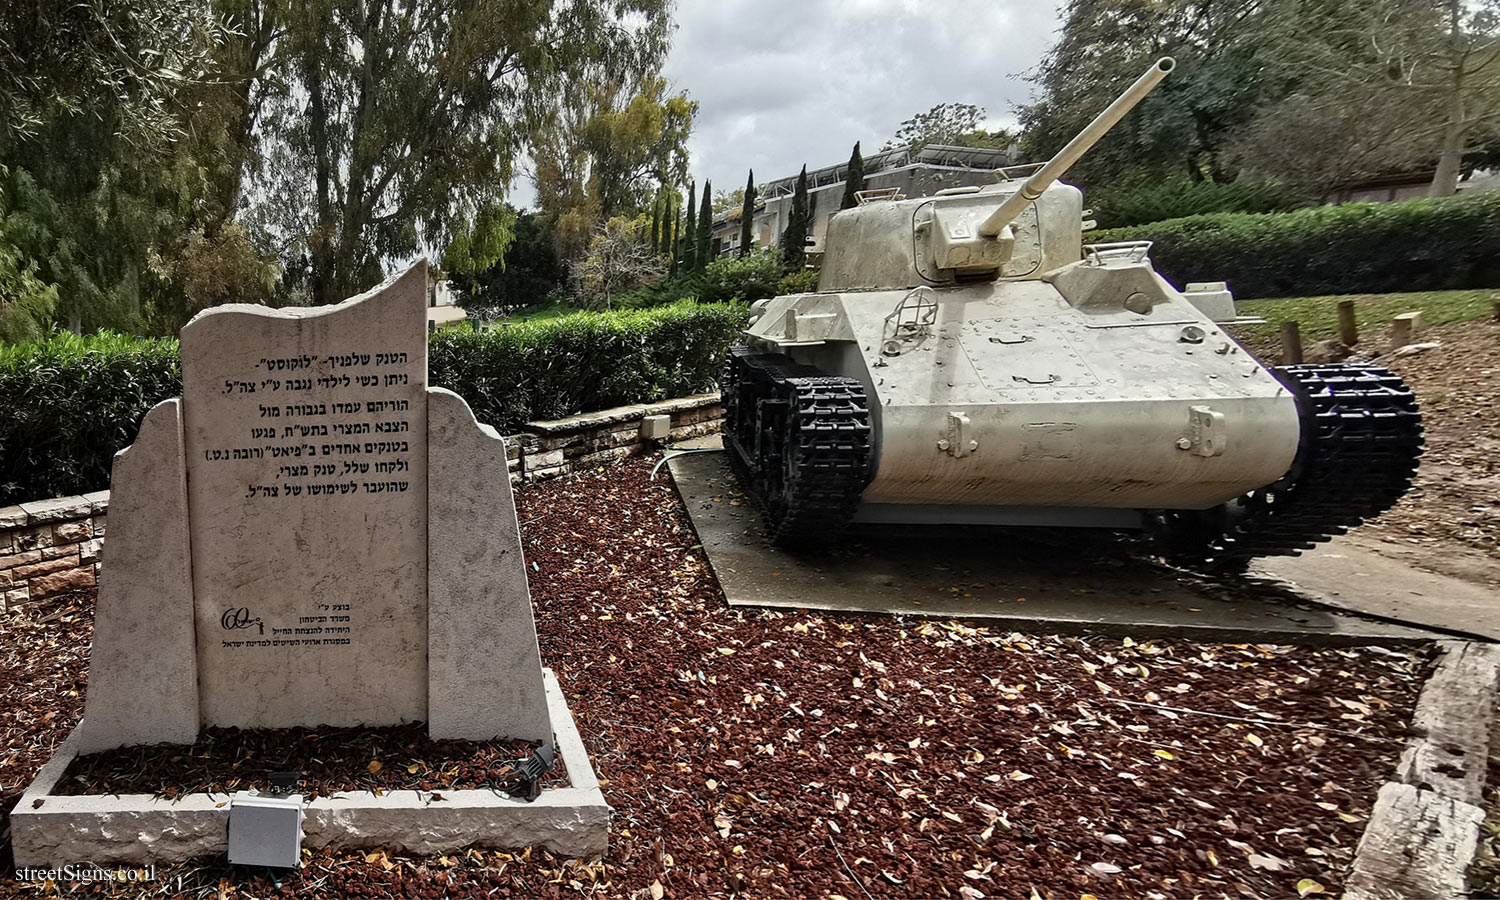 Negba - A monument to an Egyptian tank against which they fought in the War of Independence - Negba, Israel